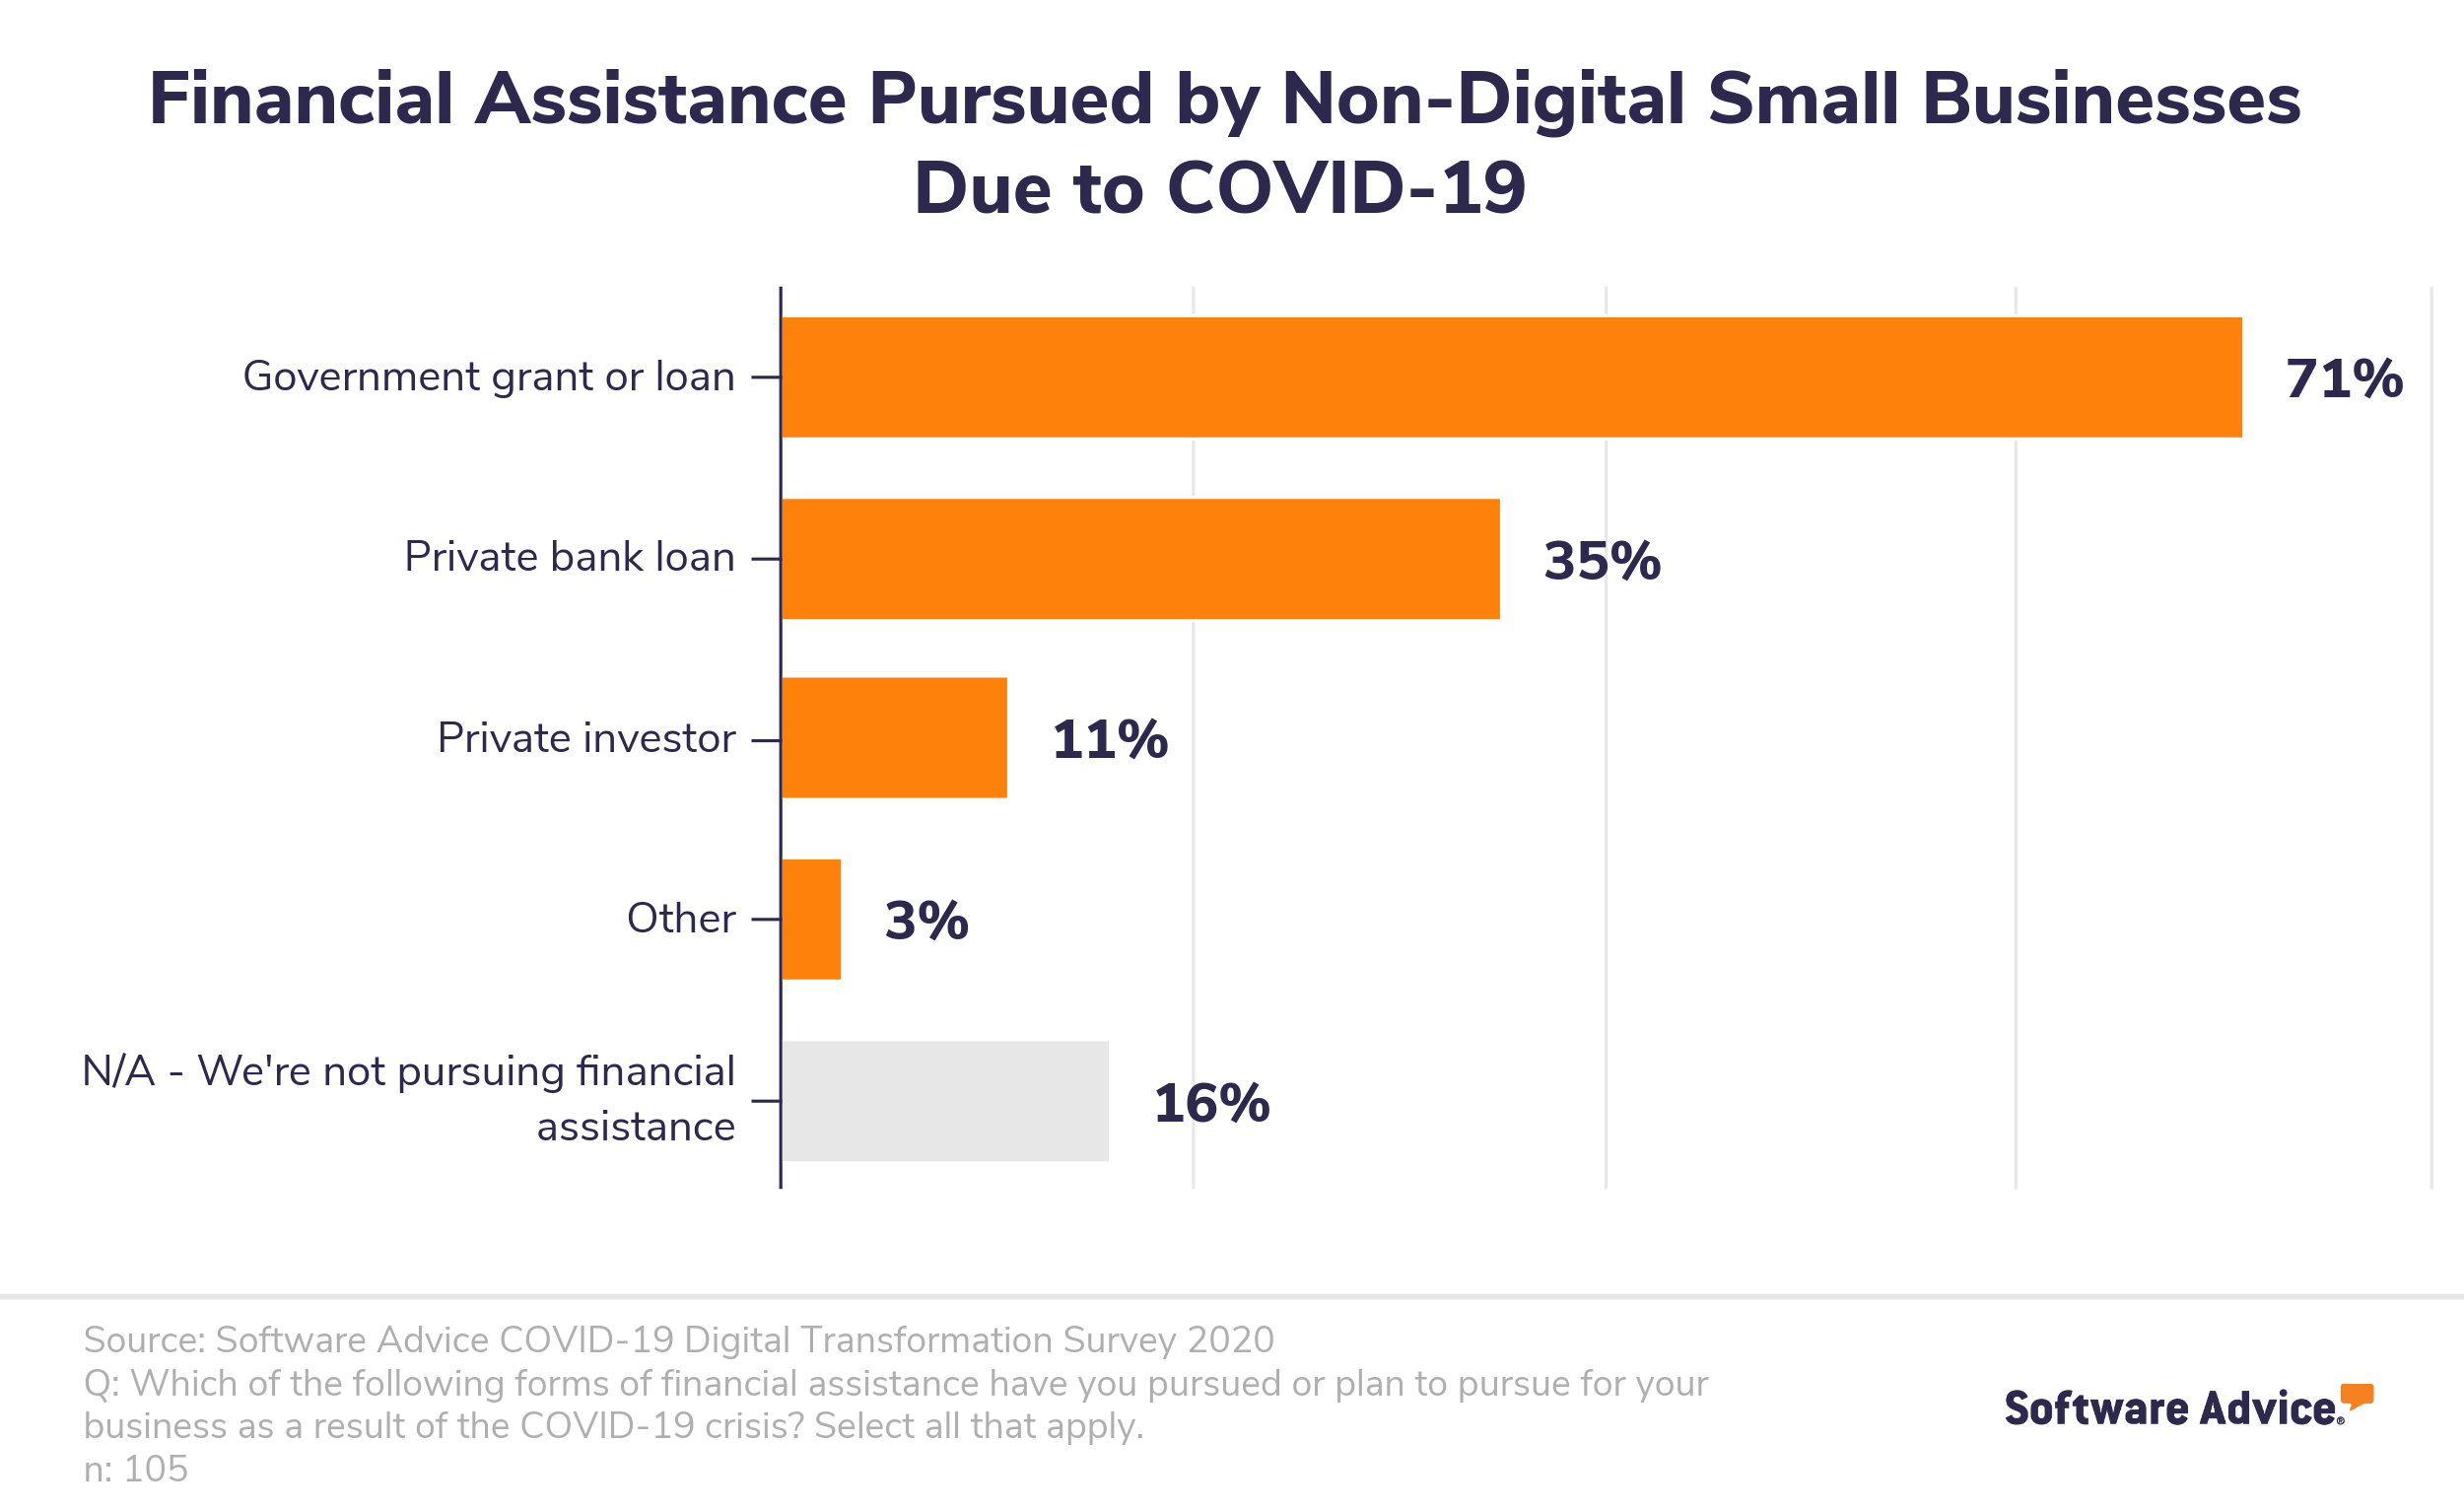 Bar-chart-showing-the-types-of-financial-assistance-non-digital-small-businesses-are-pursuing-due-to-COVID-19.